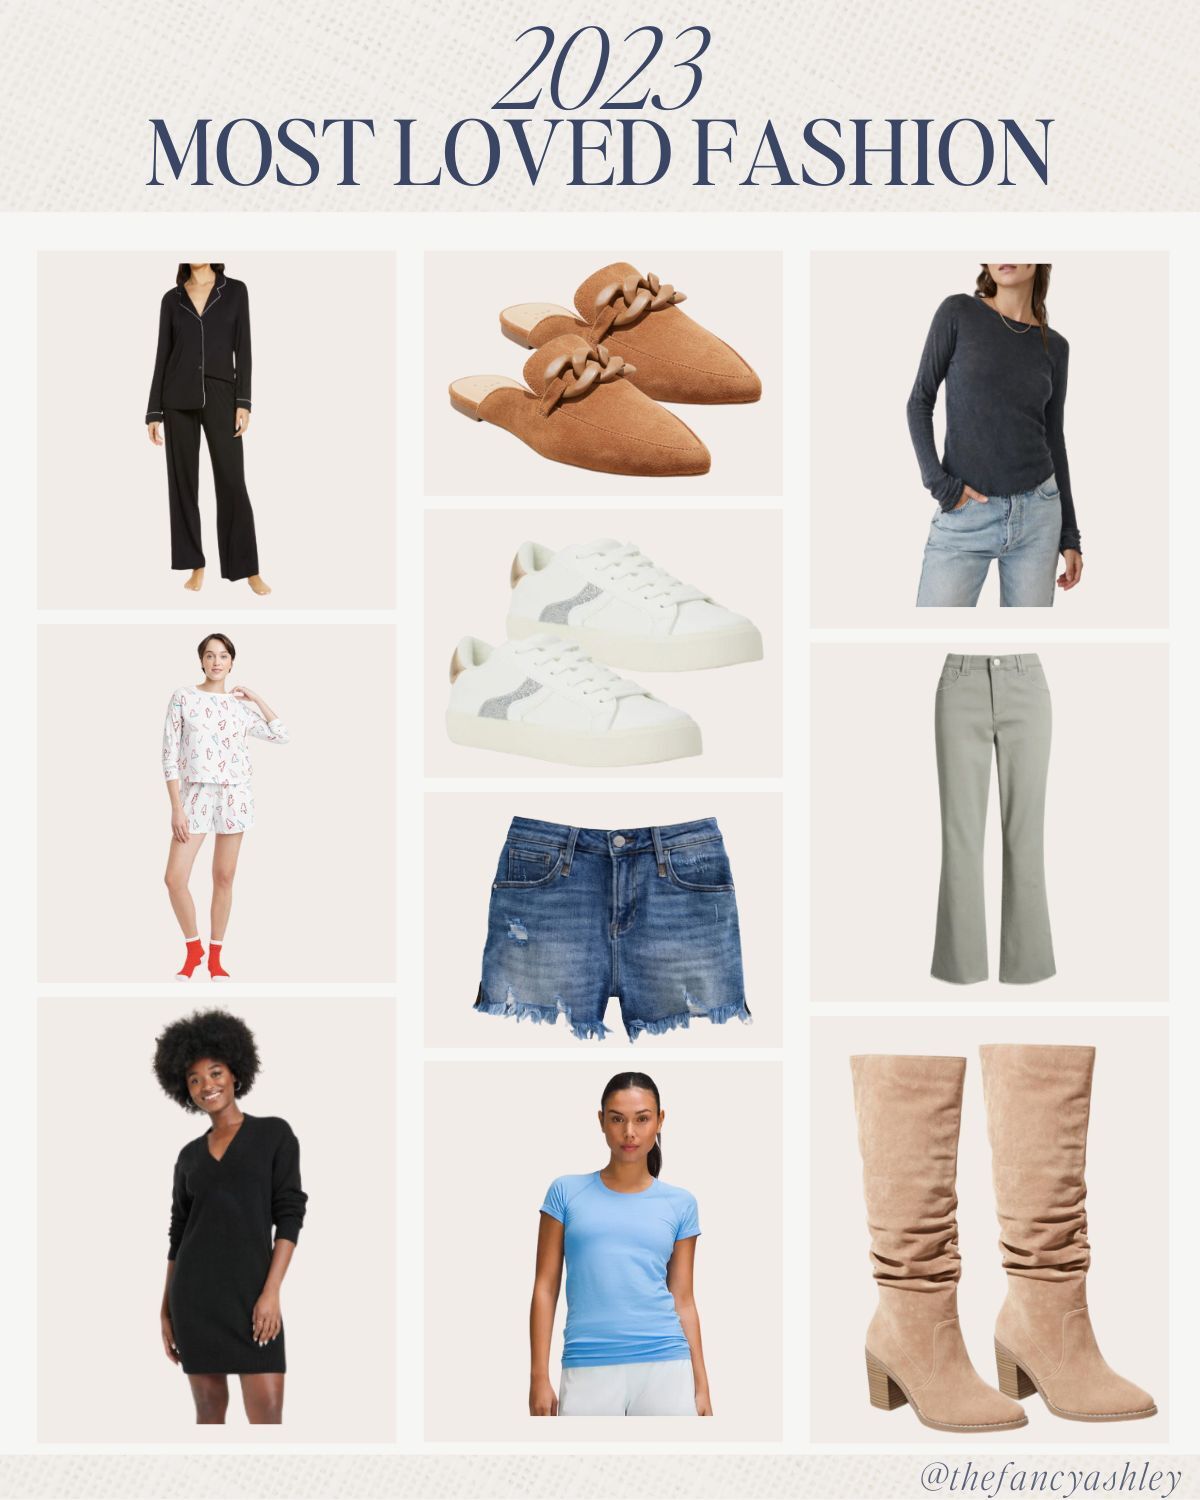 Your Most Loved Fashion from 2023